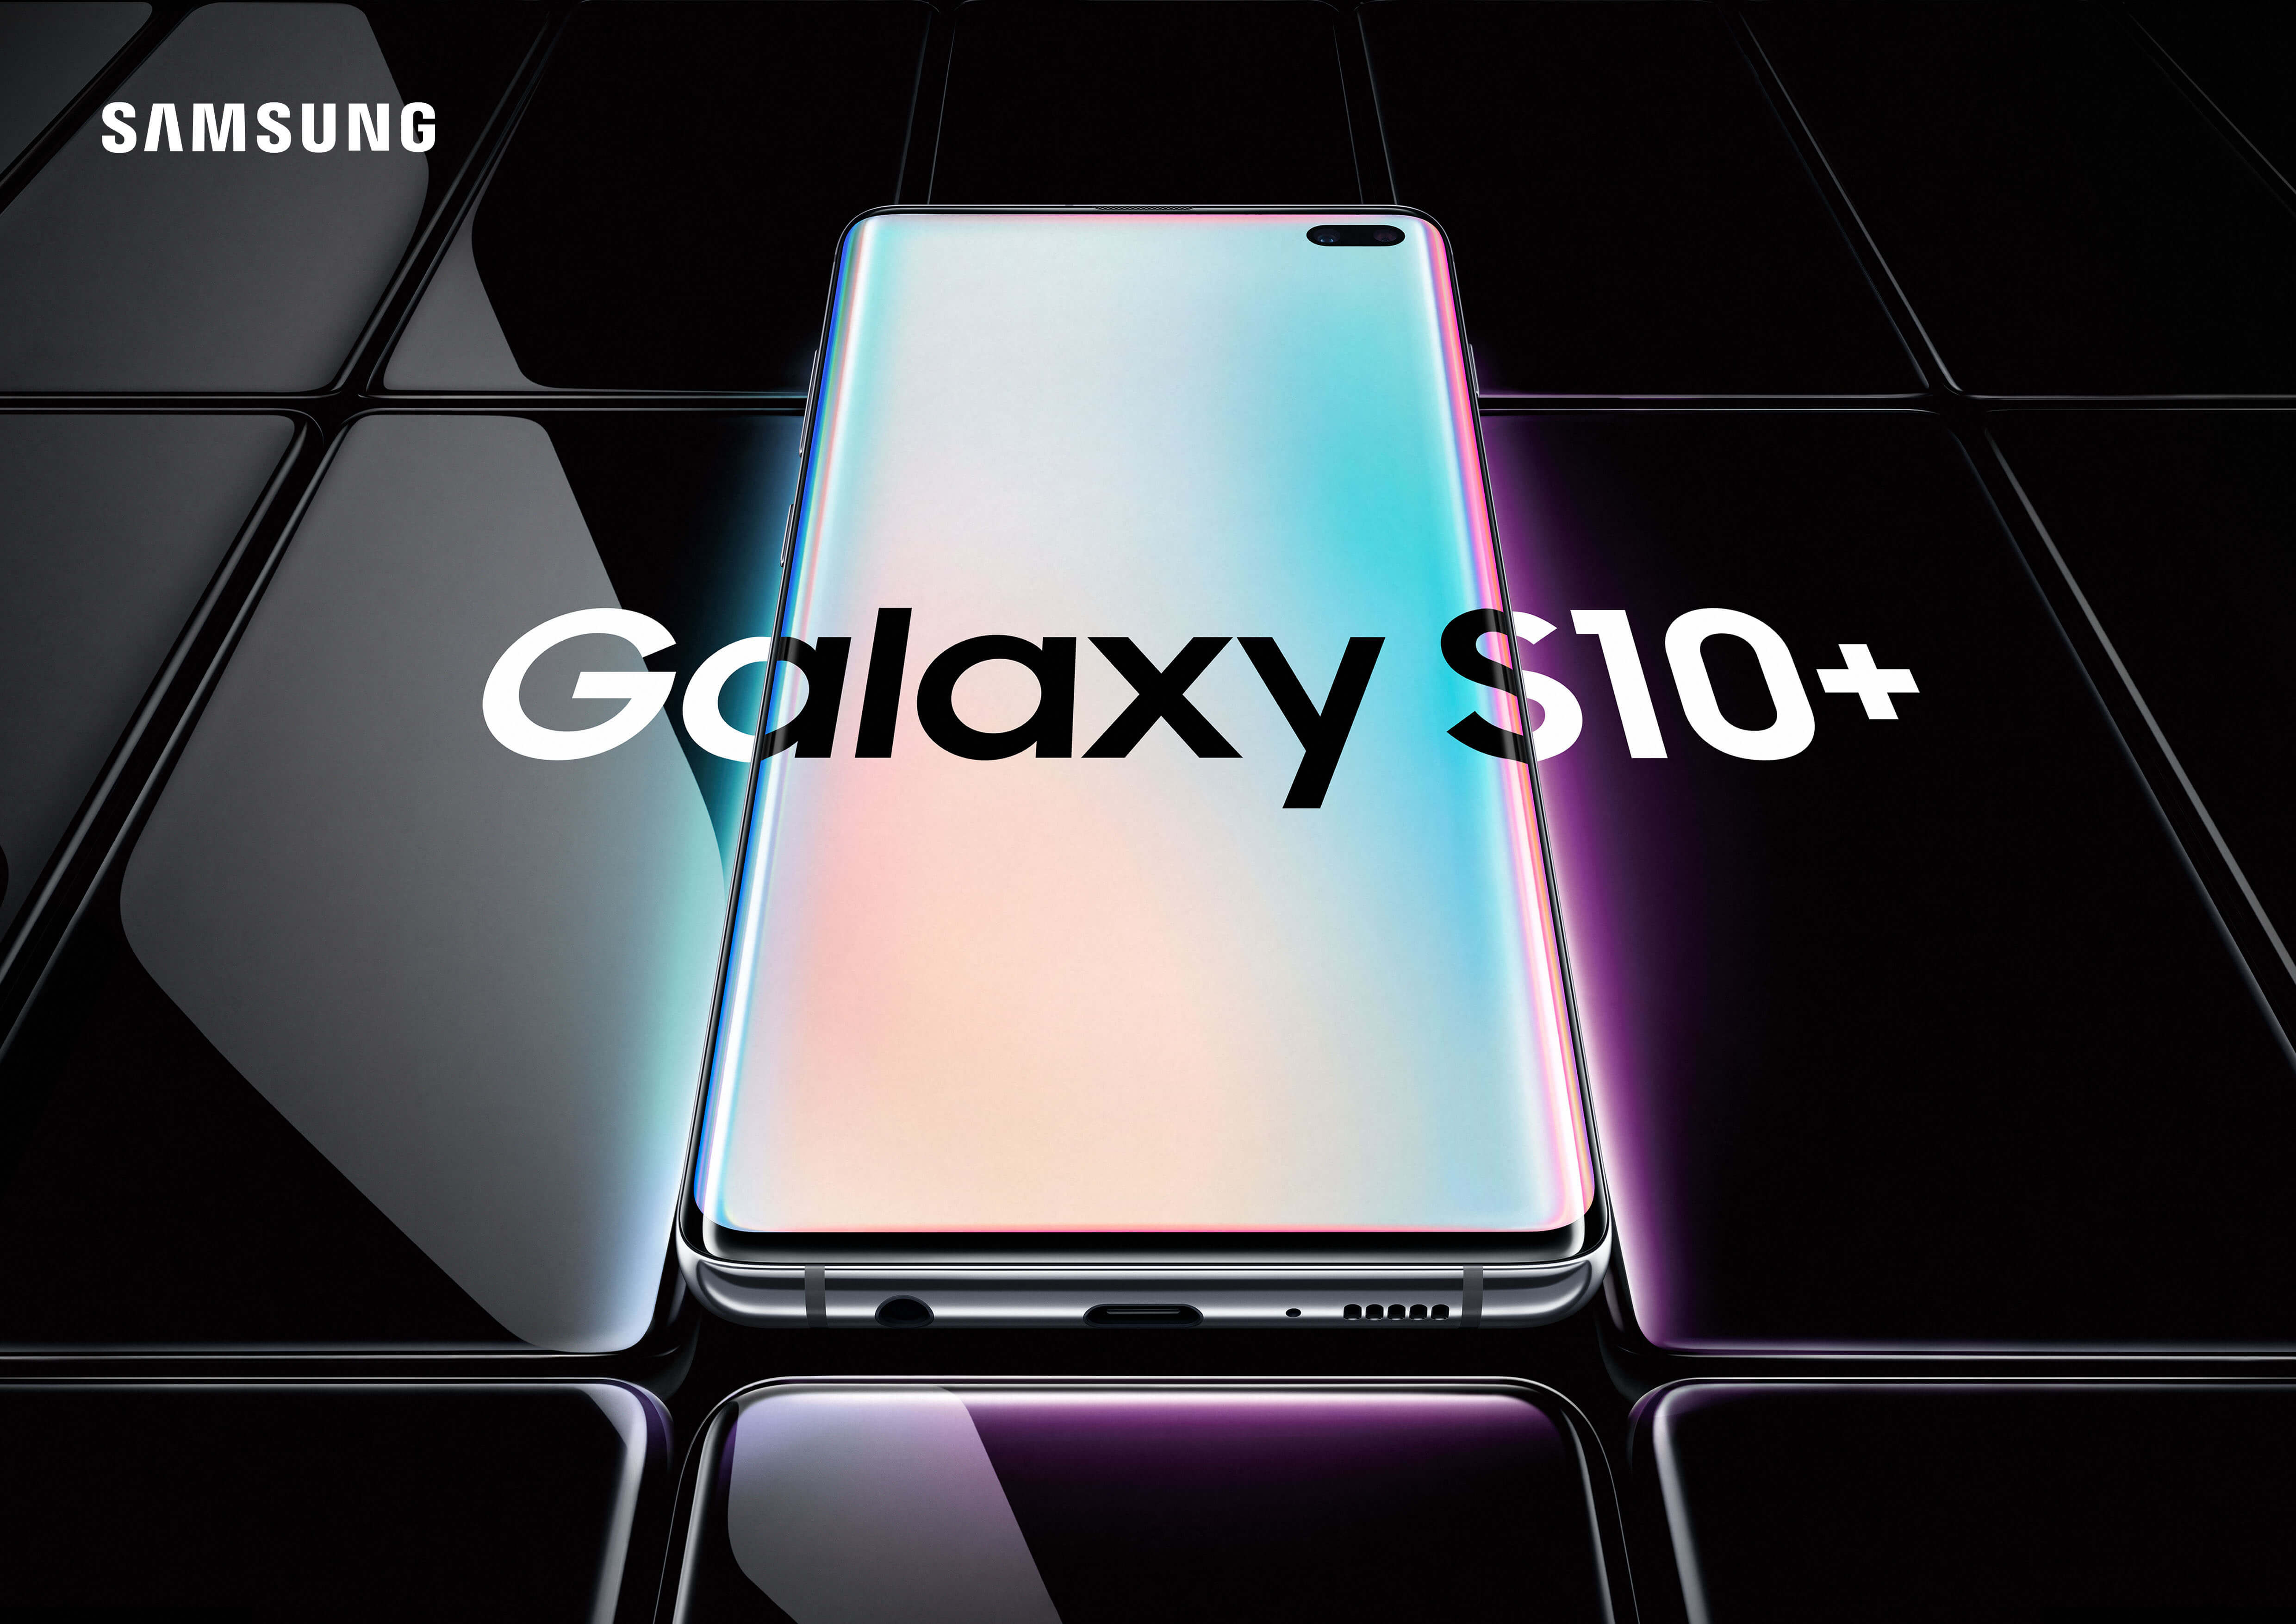 Why Samsung’s S10+ is the most powerful Android phone ever